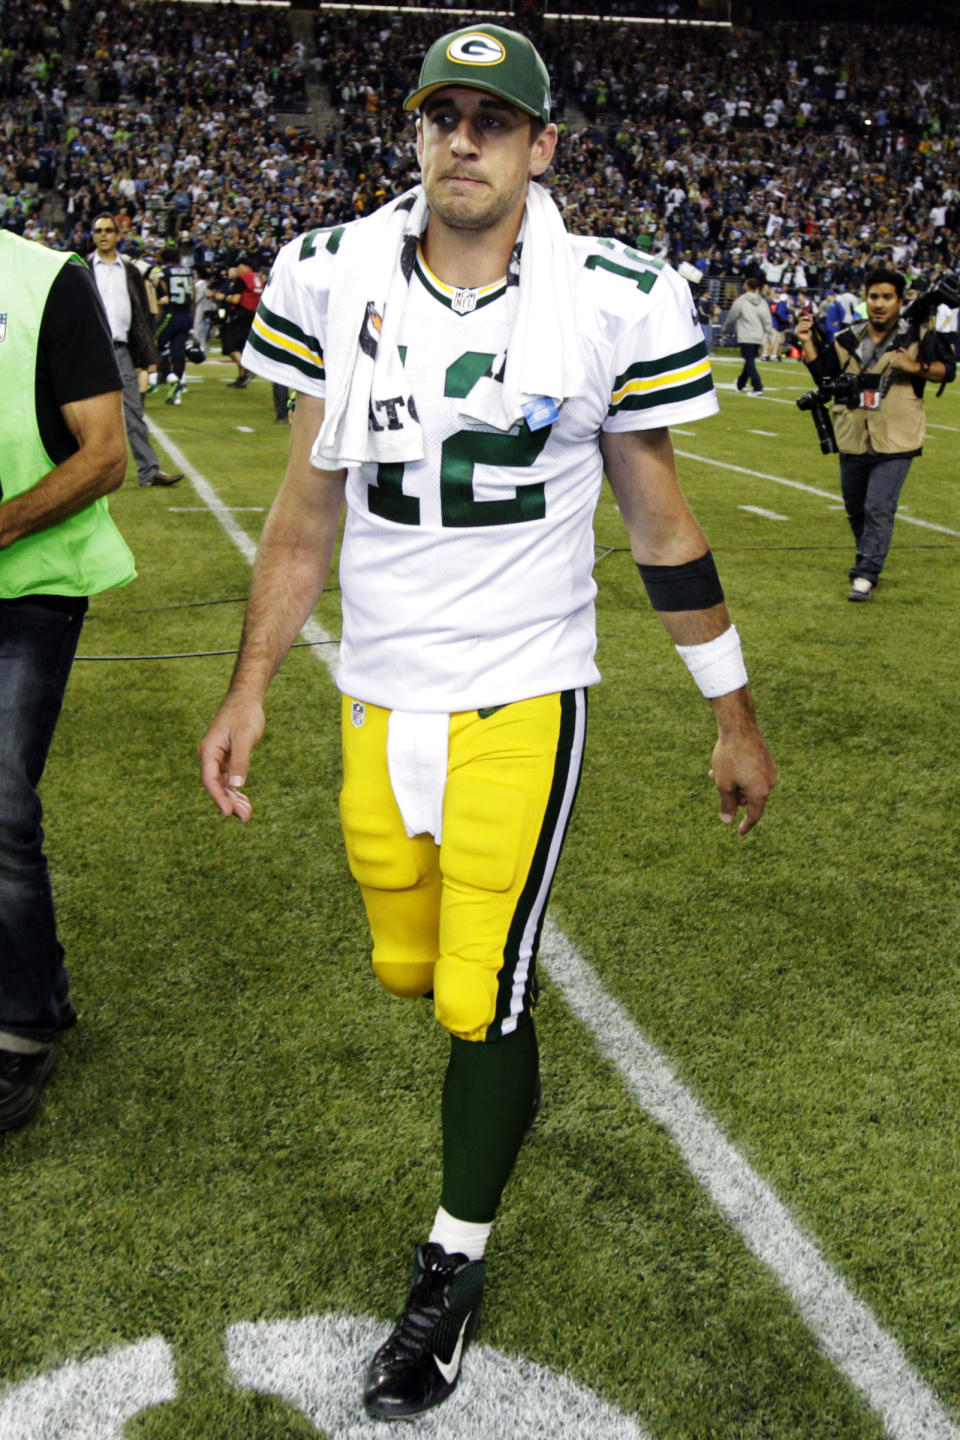 Green Bay Packers quarterback Aaron Rodgers walks off the field after the Seattle Seahawks defeated the Packers 14-12 in an NFL football game, Monday, Sept. 24, 2012, in Seattle. (AP Photo/Ted S. Warren)